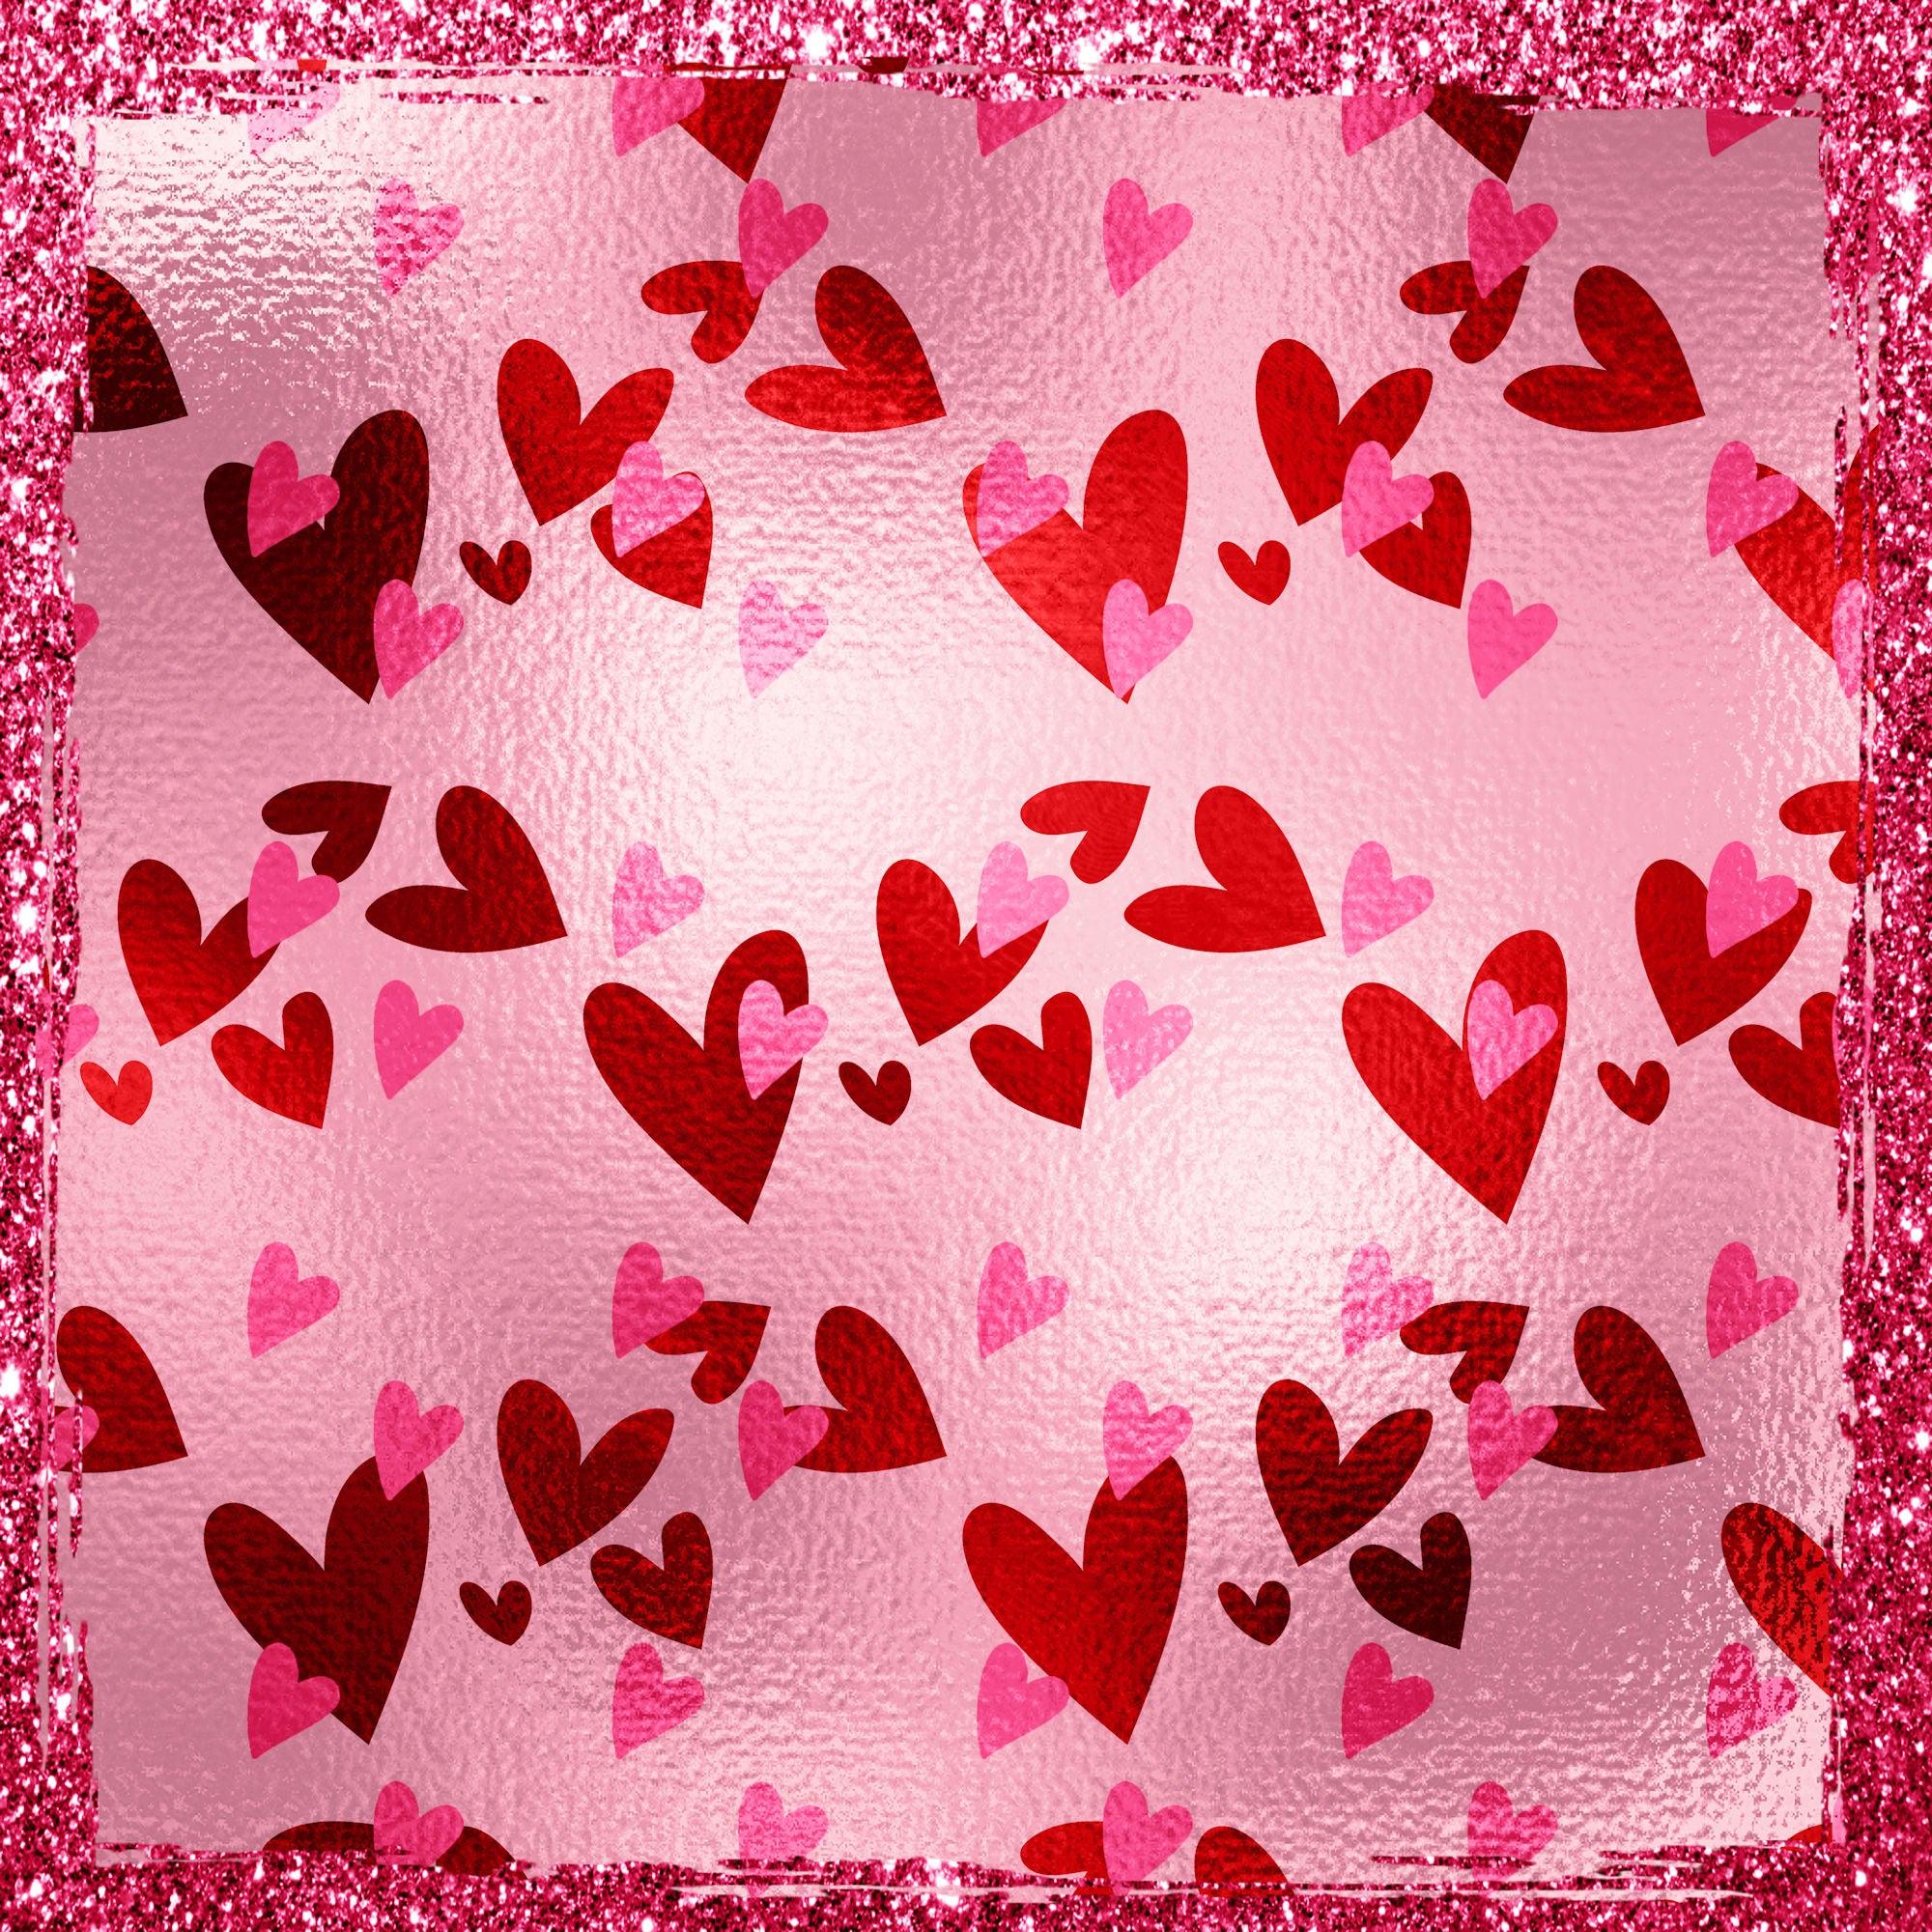 Be Mine Valentine Collection Hearts On Fire 12 x 12 Double-Sided Scrapbook Paper by SSC Designs - Scrapbook Supply Companies